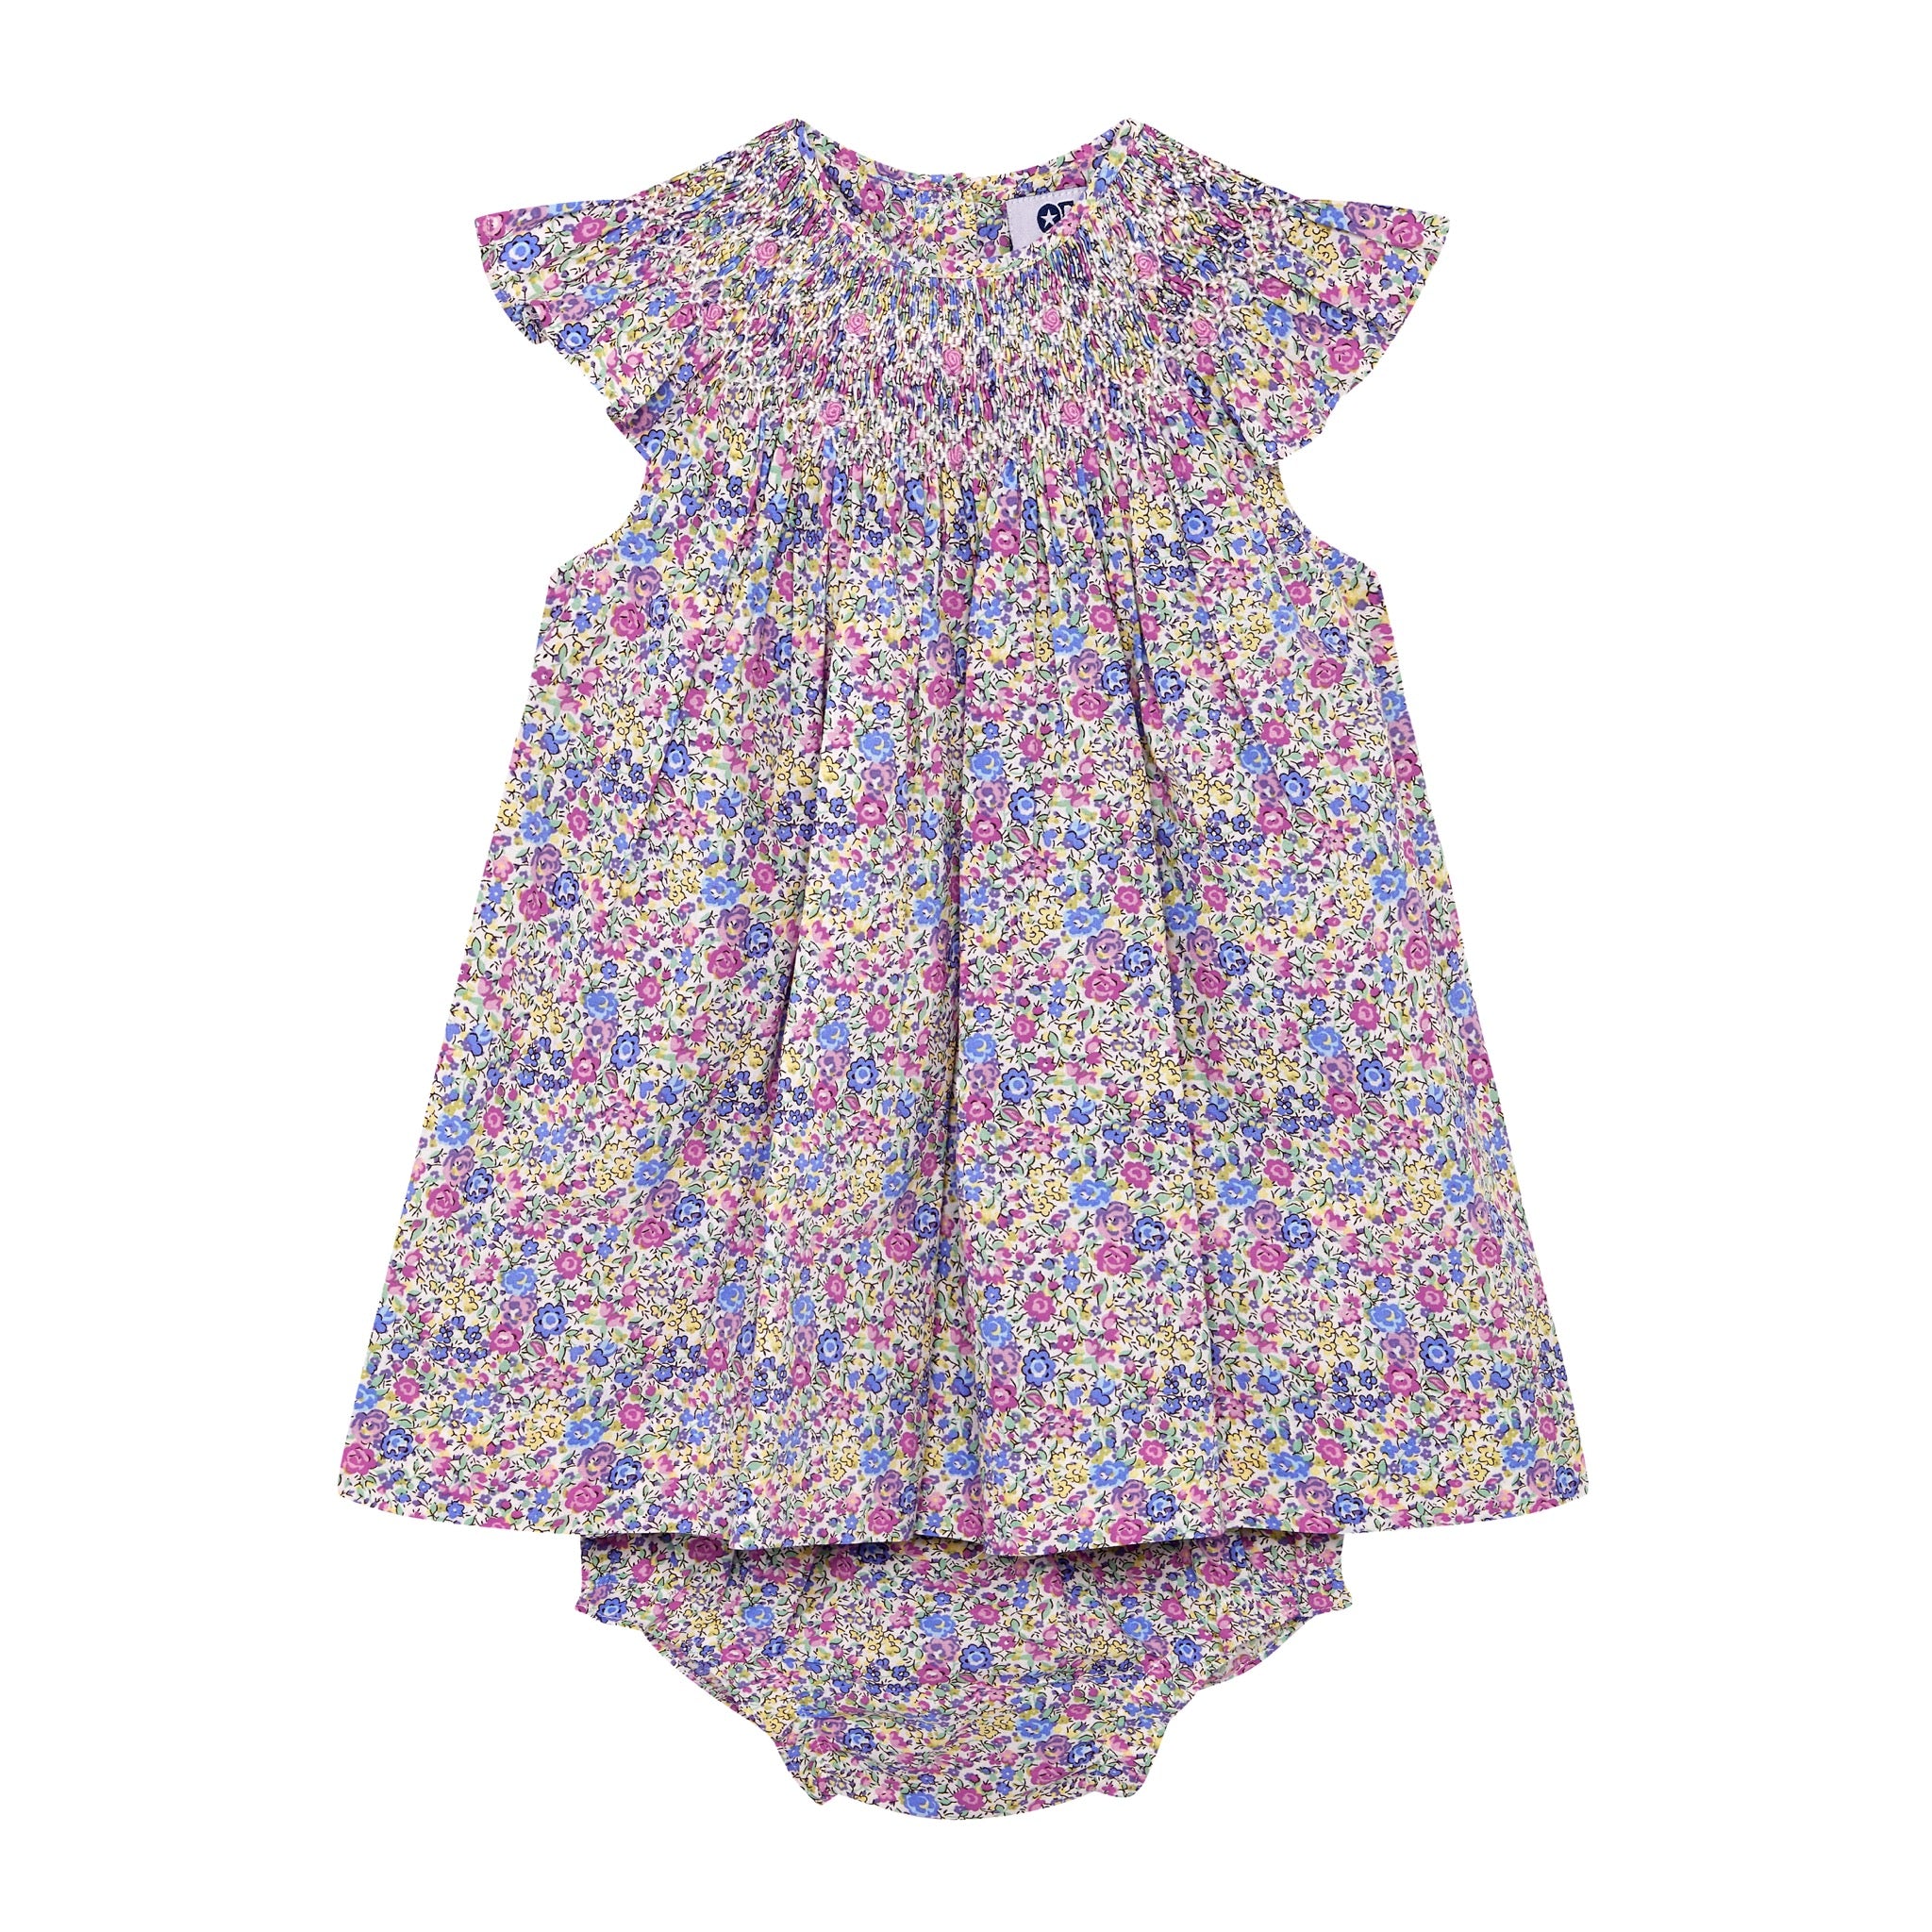 frill sleeve smock dress for baby in floral design, front